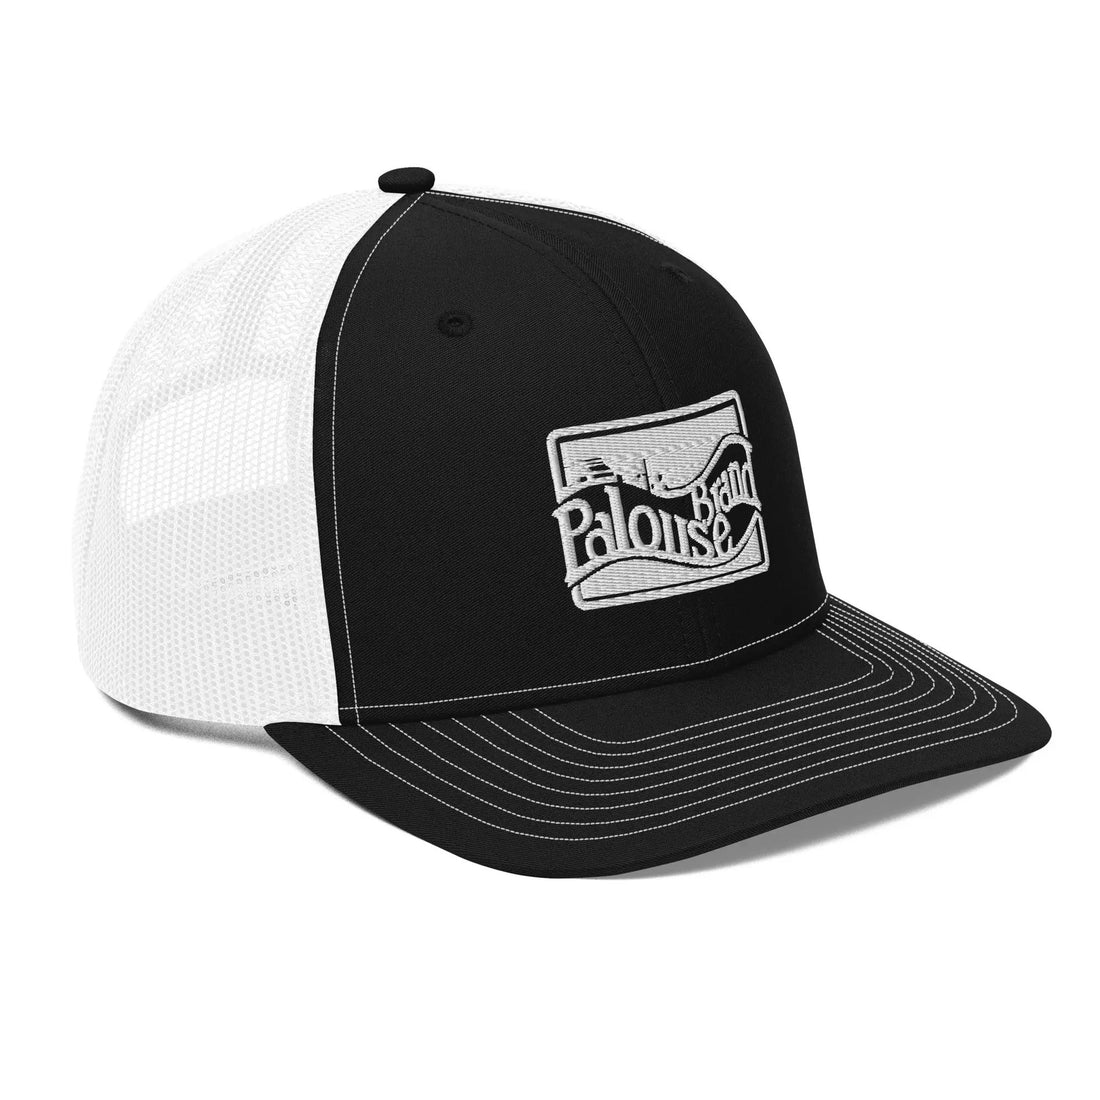 a black and white trucker hat with a white patch on the front